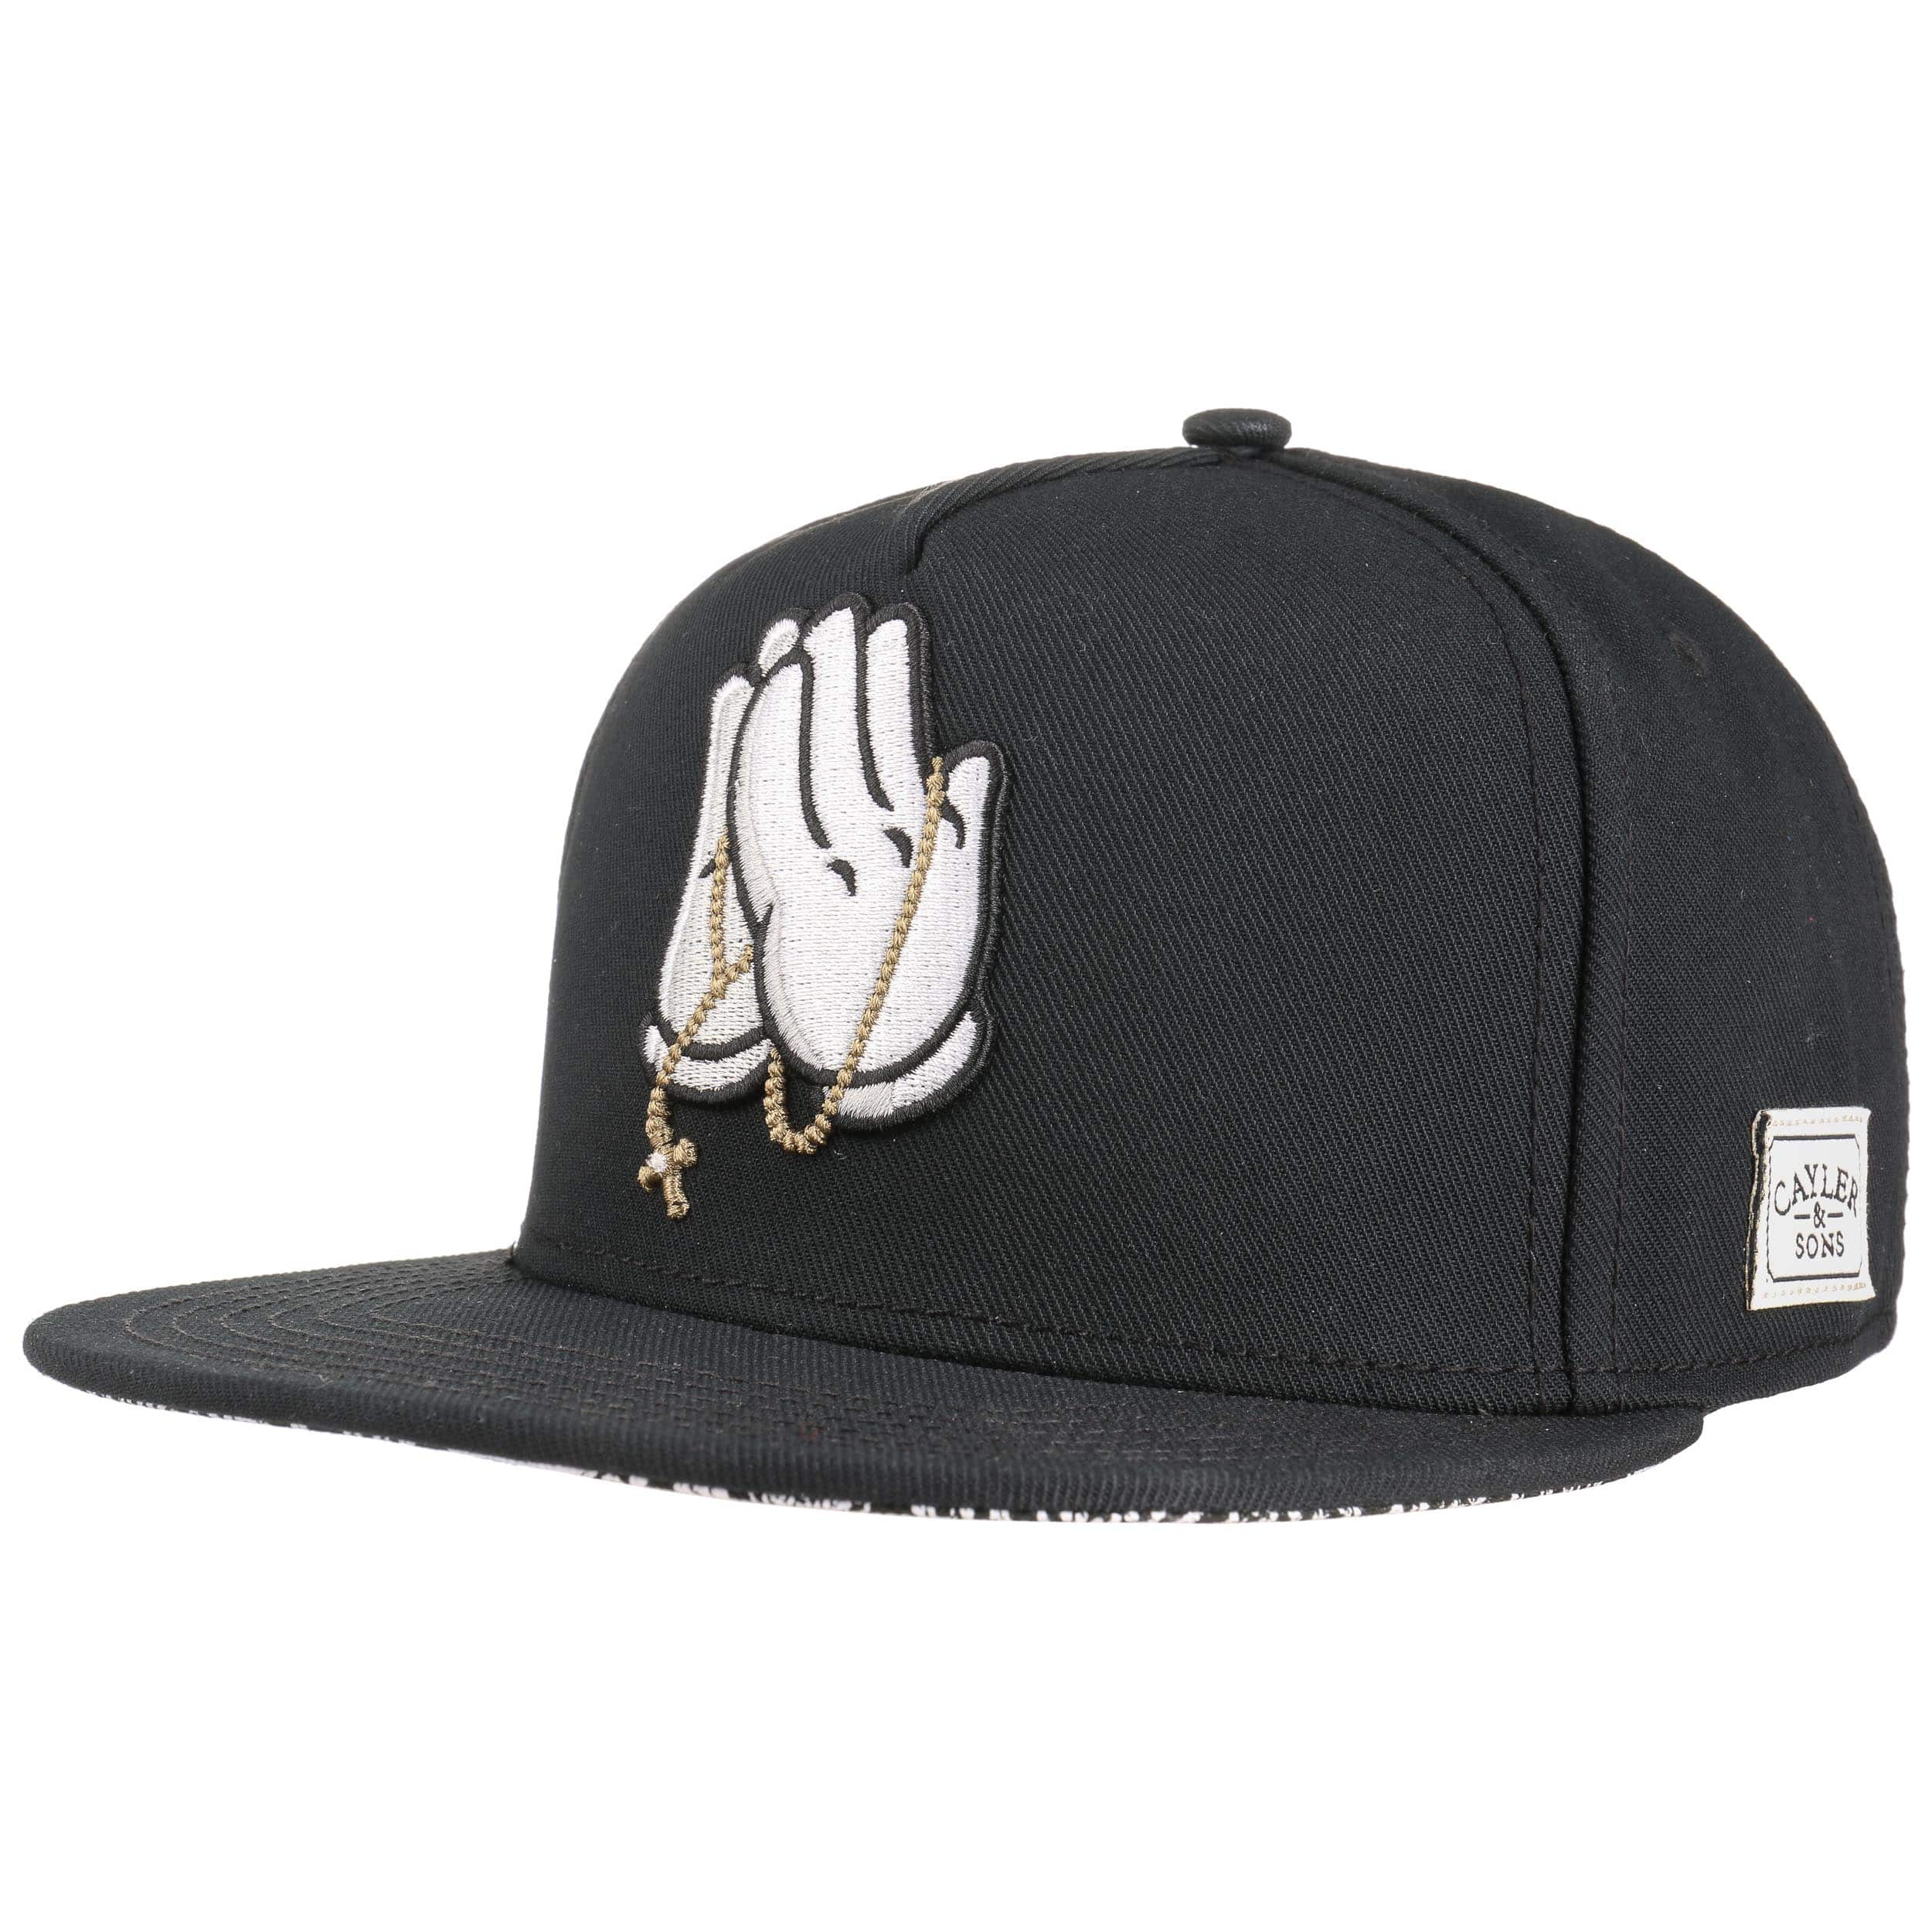 Pray For Classic Cap by Cayler & Sons - 32,95 €